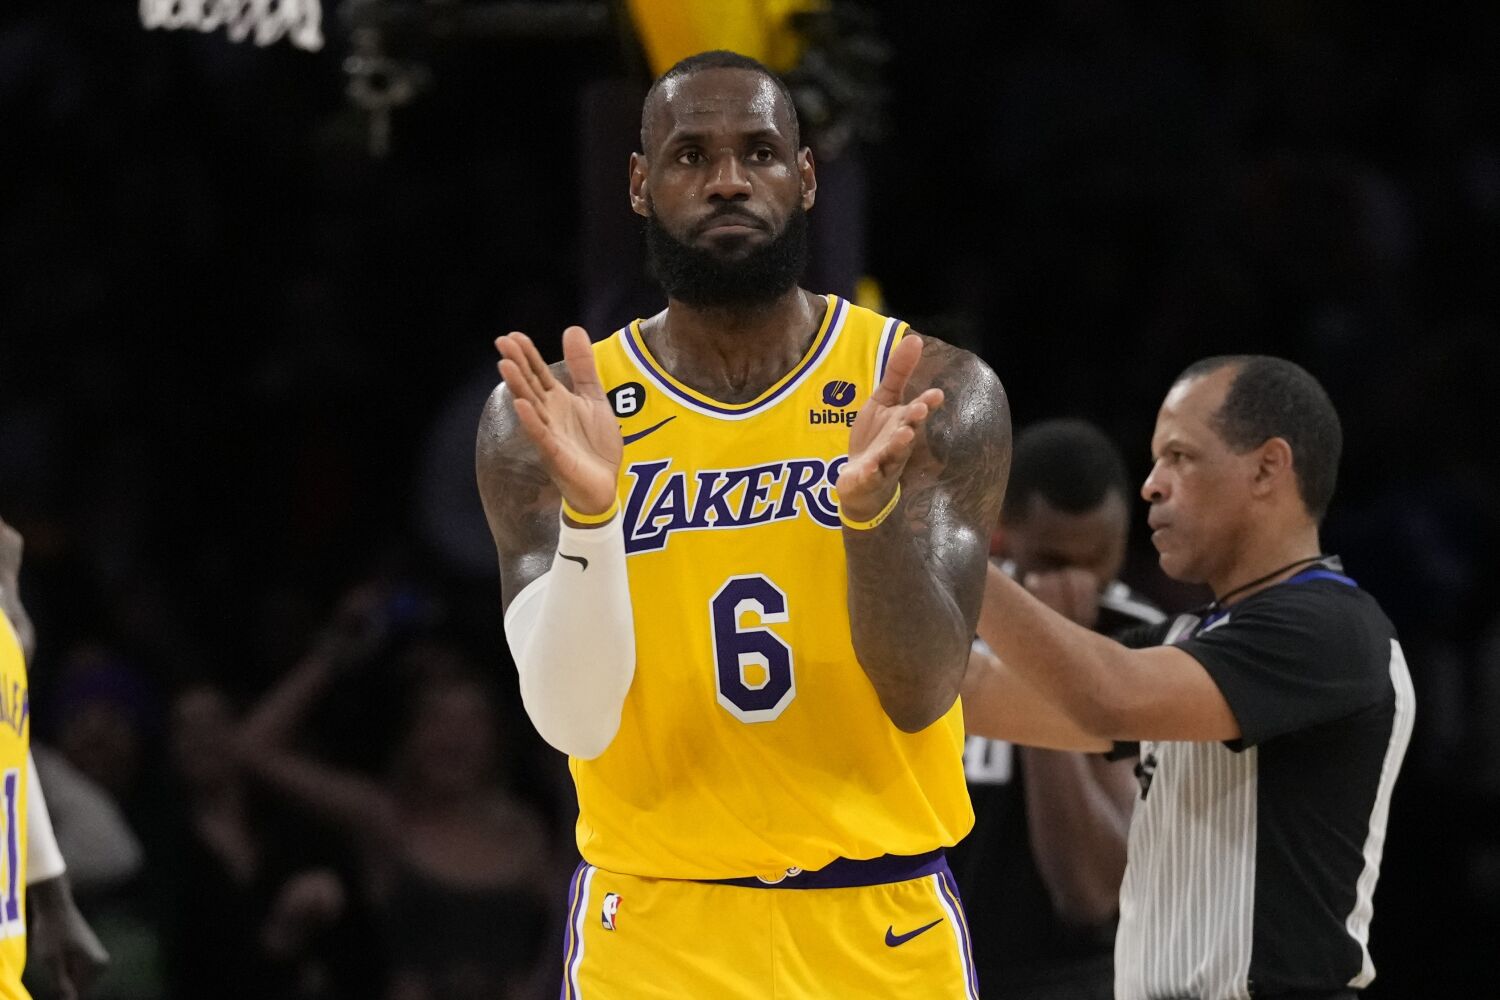 Elliott: LeBron James says Lakers were 'pretty good.' He knows that's not good enough